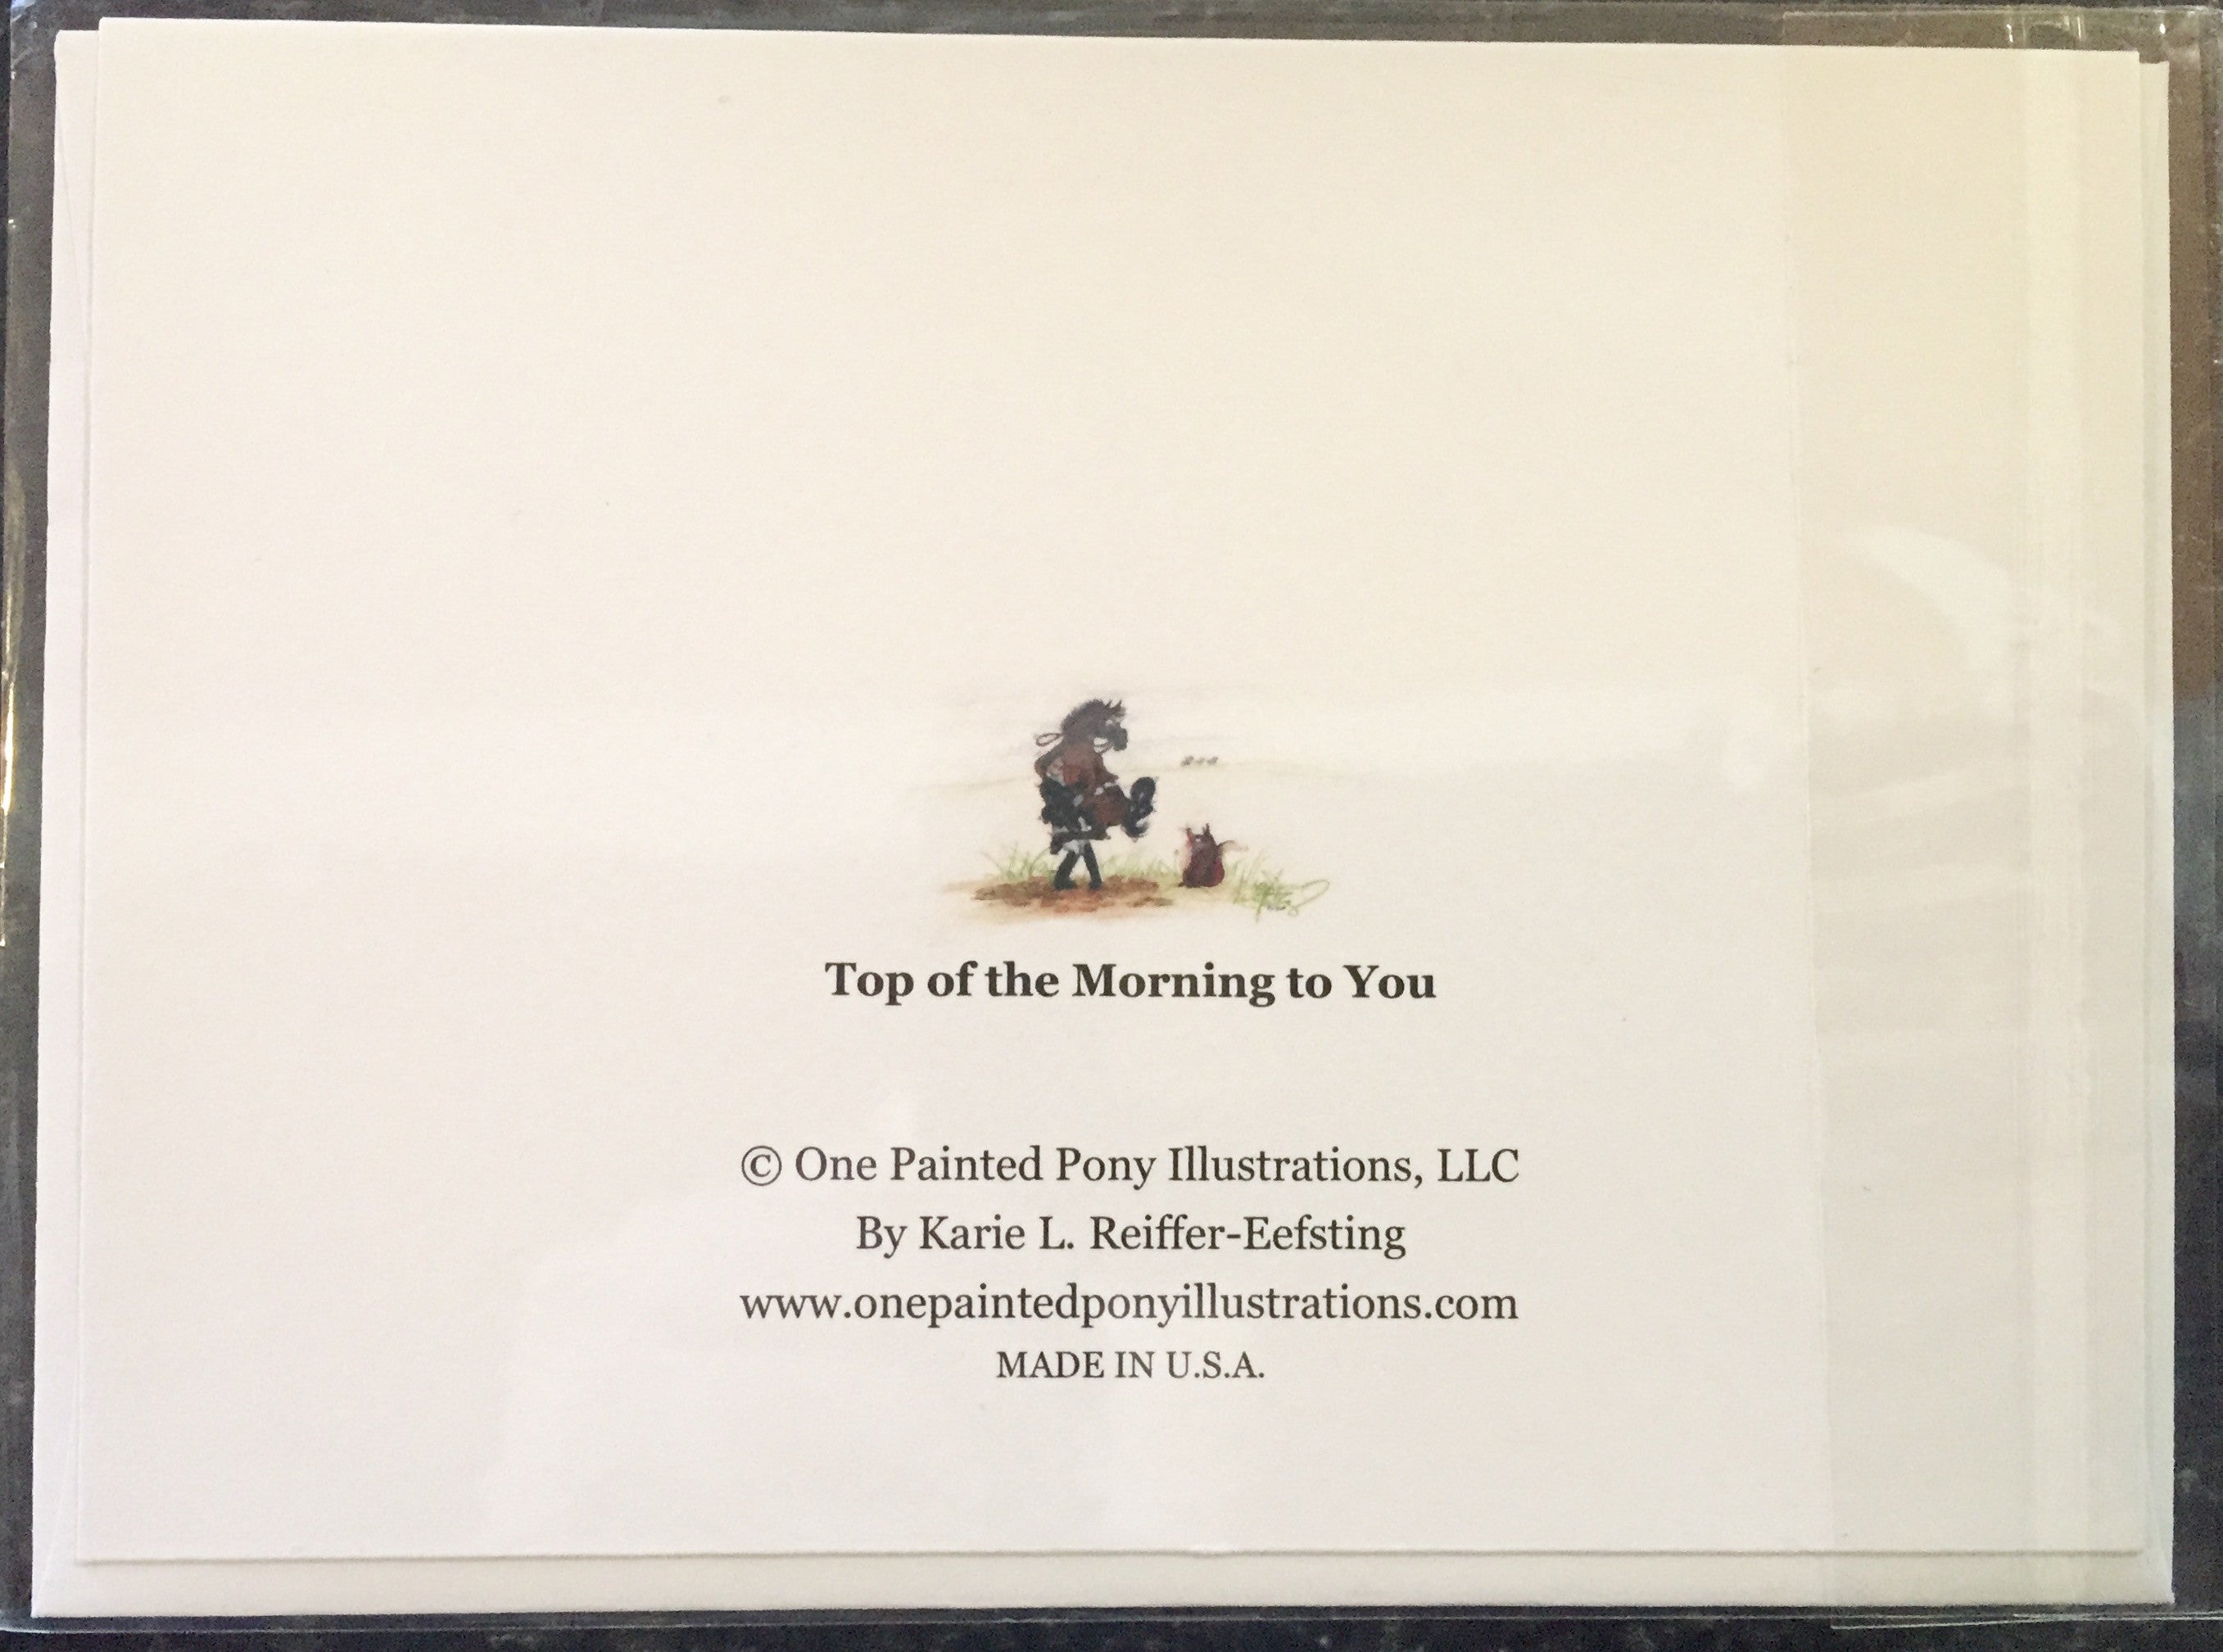 One Painted Pony Illustrations Gift Card "Top Of The Morning to You" - Horse & Hound Tack Shop & Pet Supply